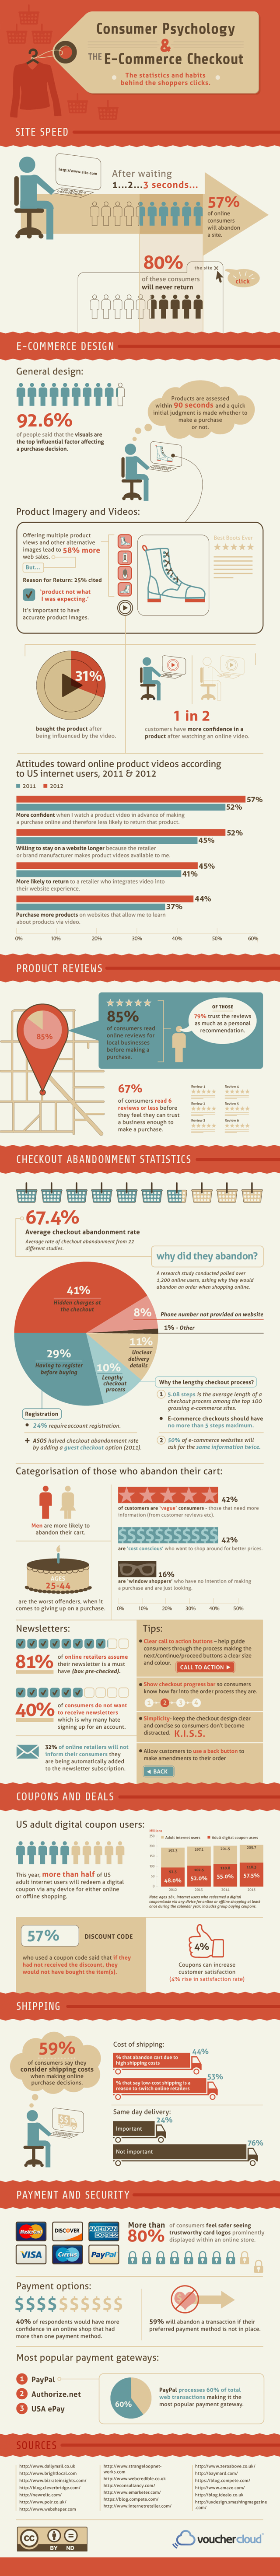 Consumer Psychology and E-commerce Checkout Infographic